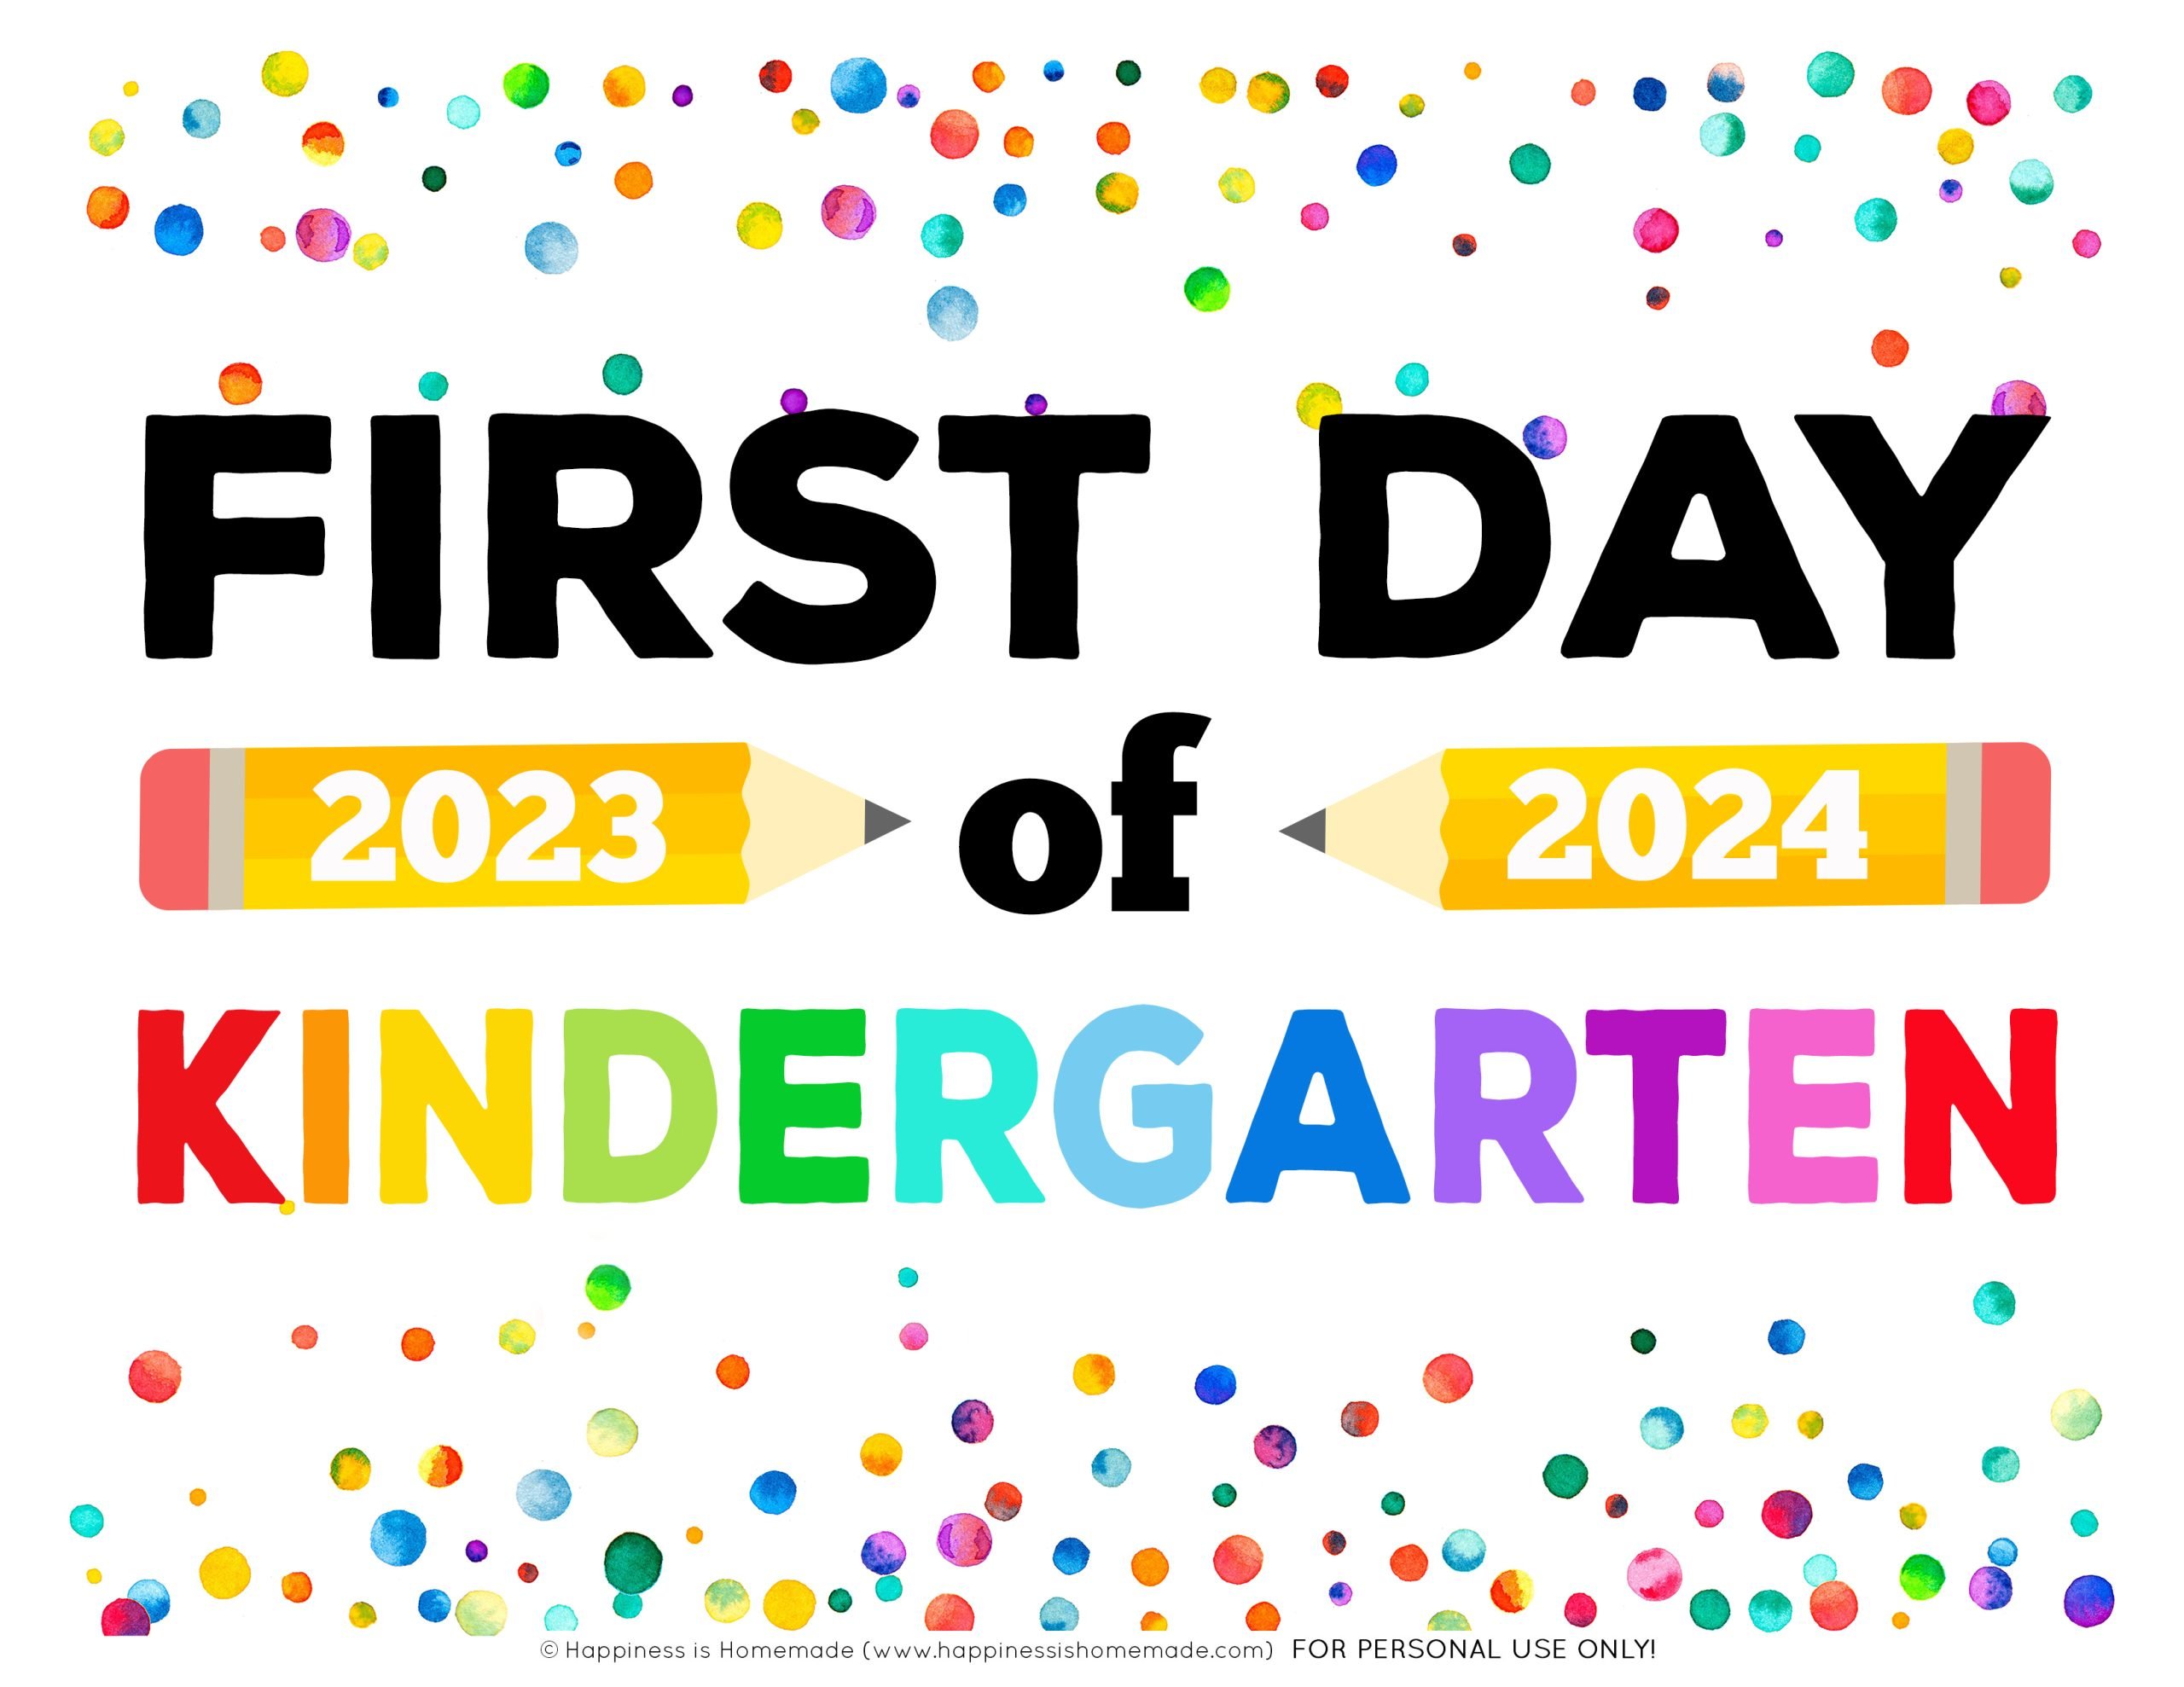 Graphic of Free Printable First Day of Kindergarten sign 2023 - 2024